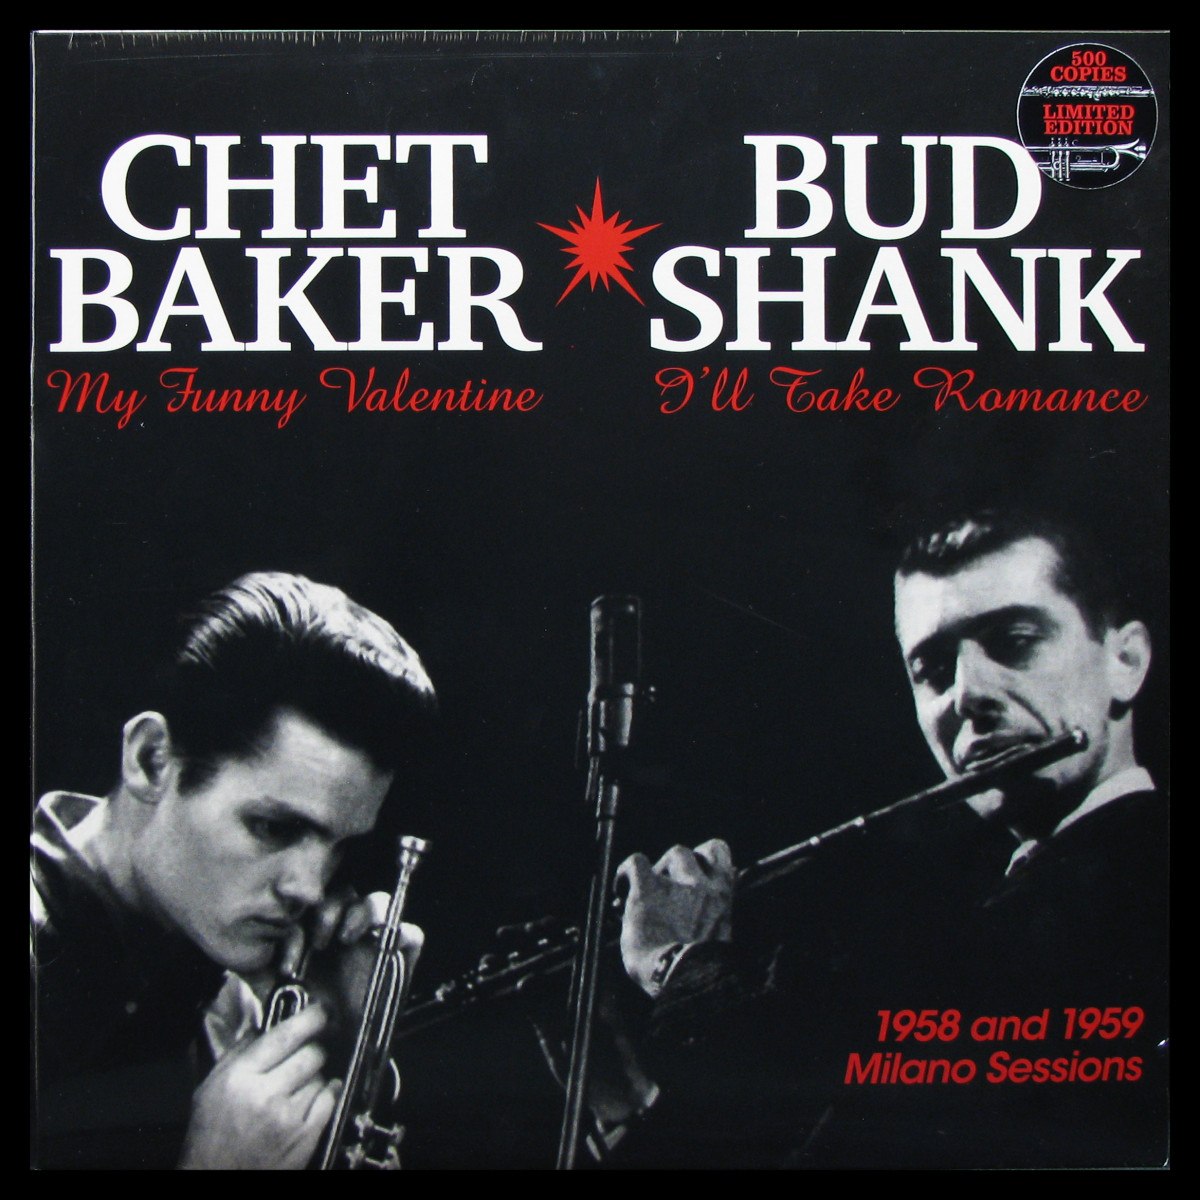 LP Chet Baker / Bud Shank — 1958 And 1959 Milano Sessions фото